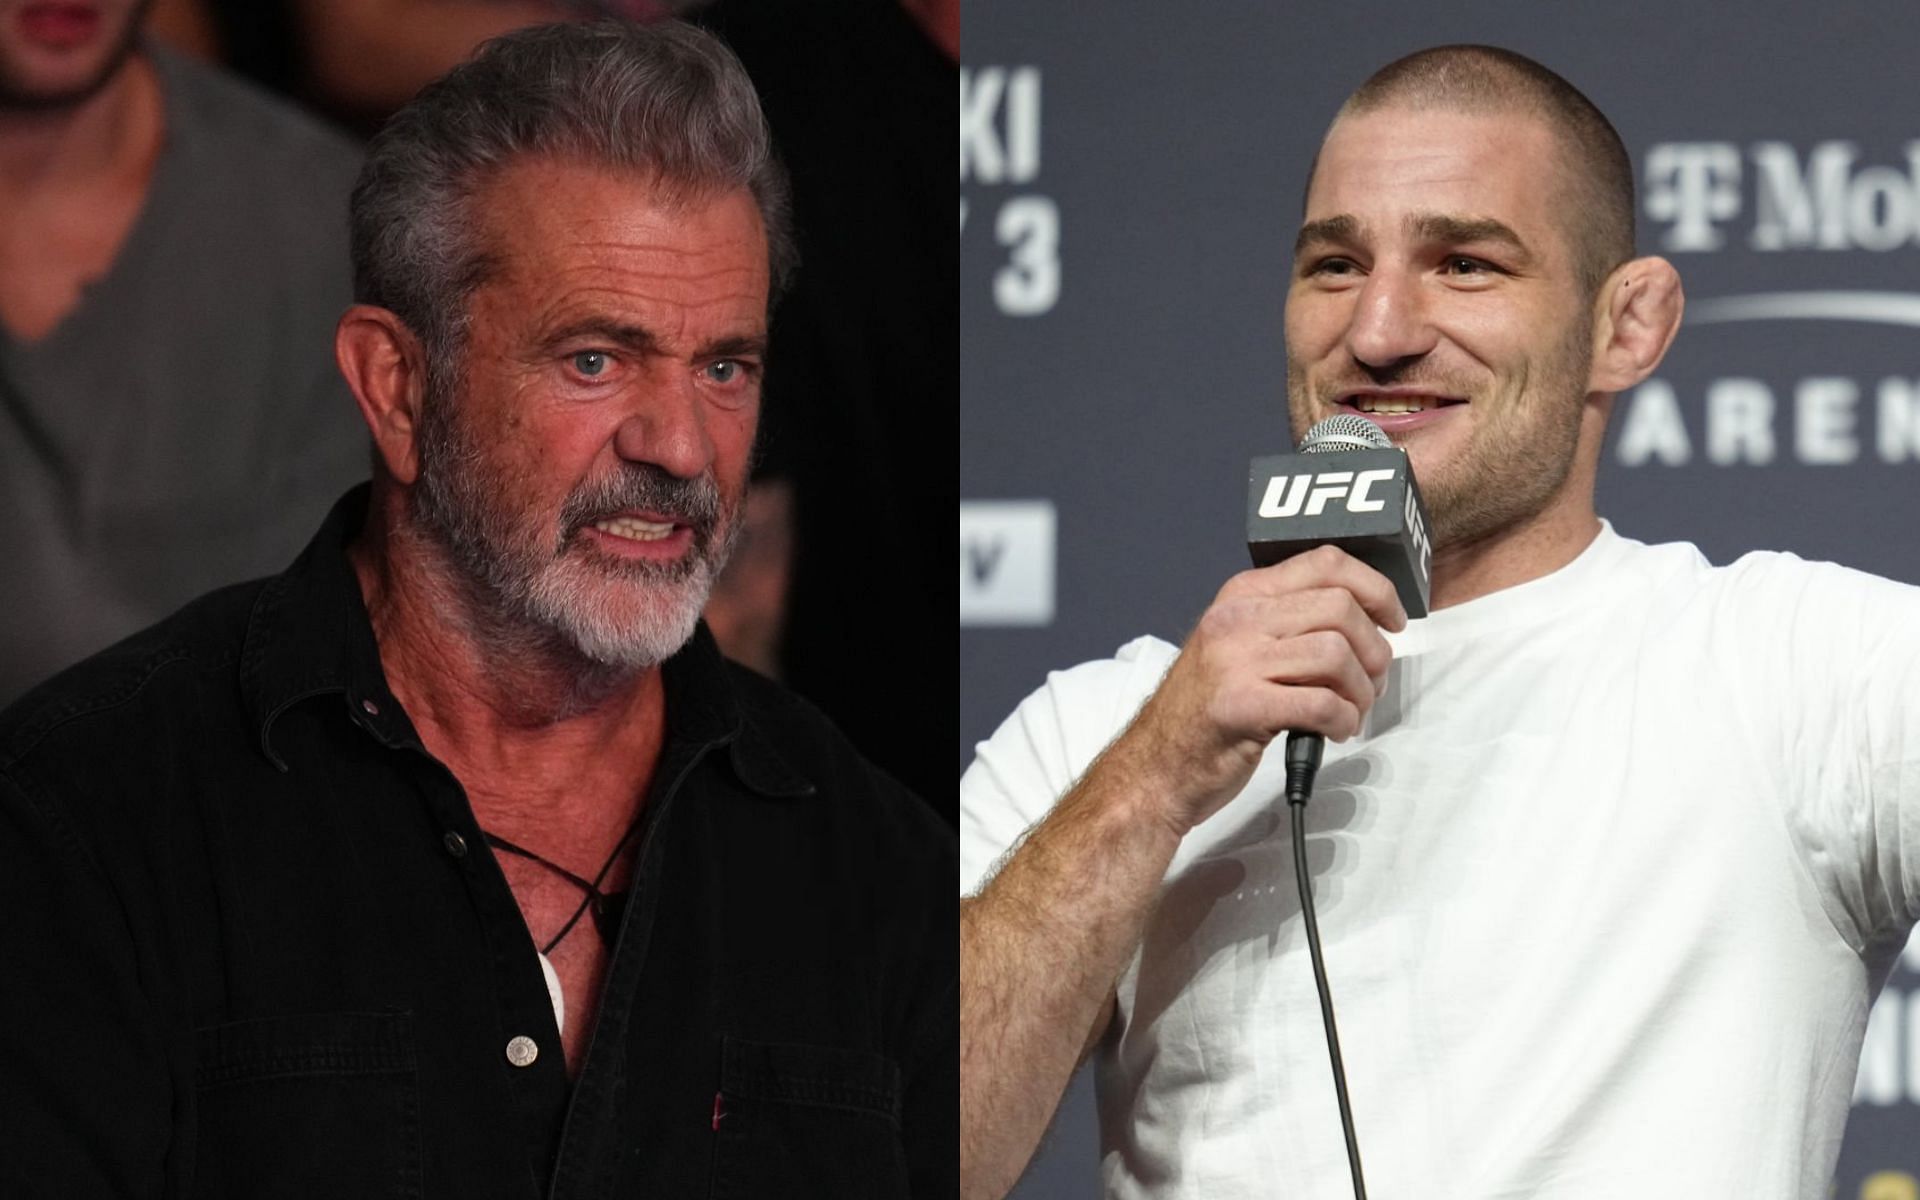 Mel Gibson (left) and Sean Strickland (right) [Images Courtesy: @GettyImages]